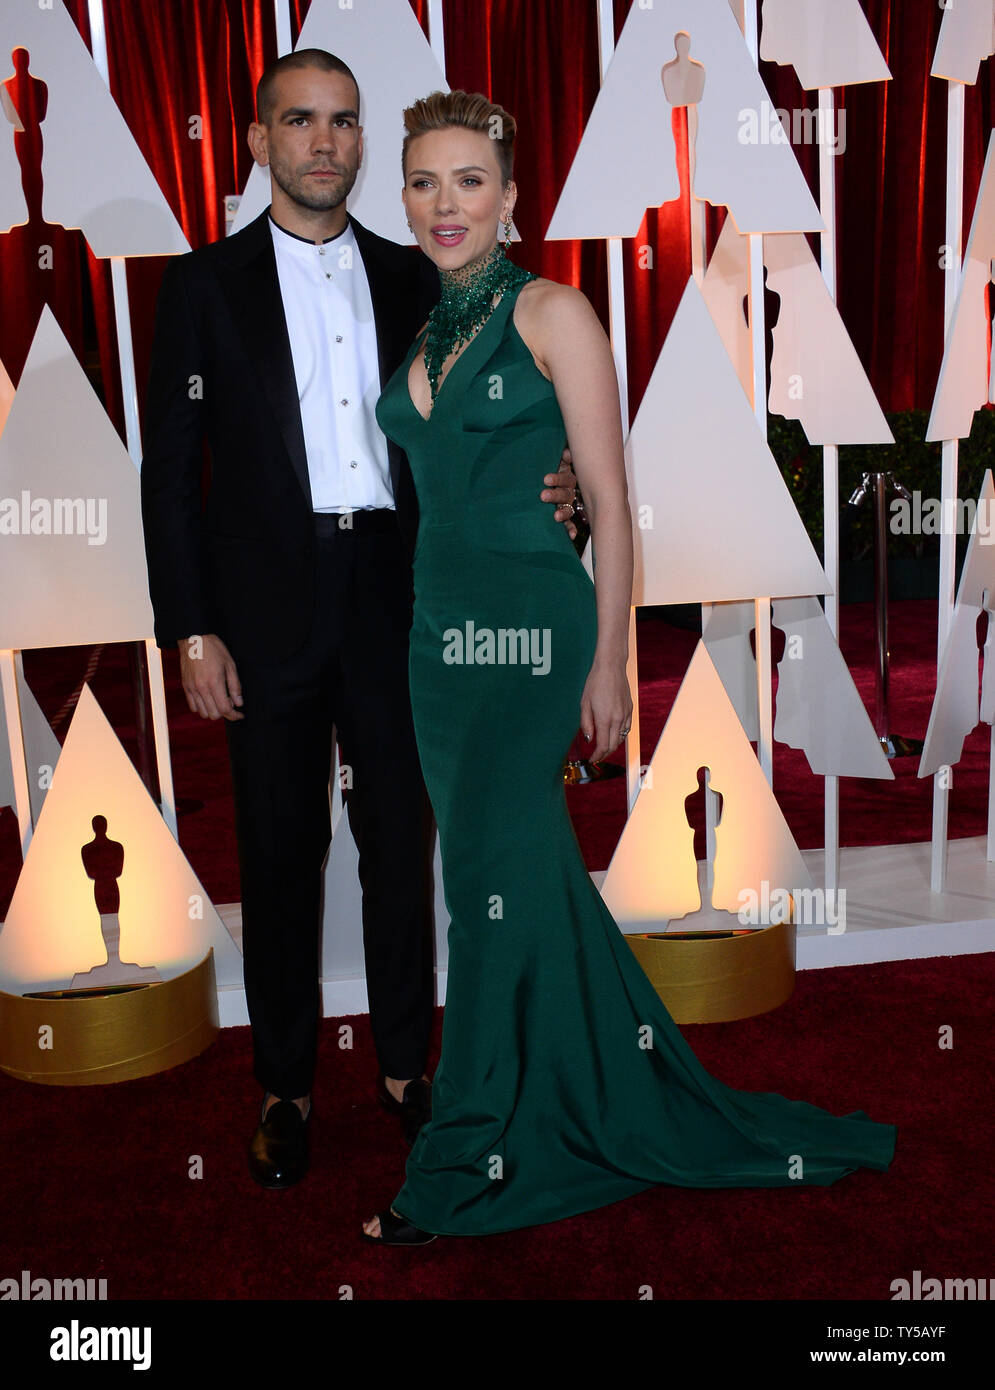 Scarlett Johansson And Husband Romain Dauriac Arrive At The 87th Academy Awards At The Hollywood Highland Center In Los Angeles On February 22 2015 Photo By Jim Ruymen Upi Stock Photo Alamy